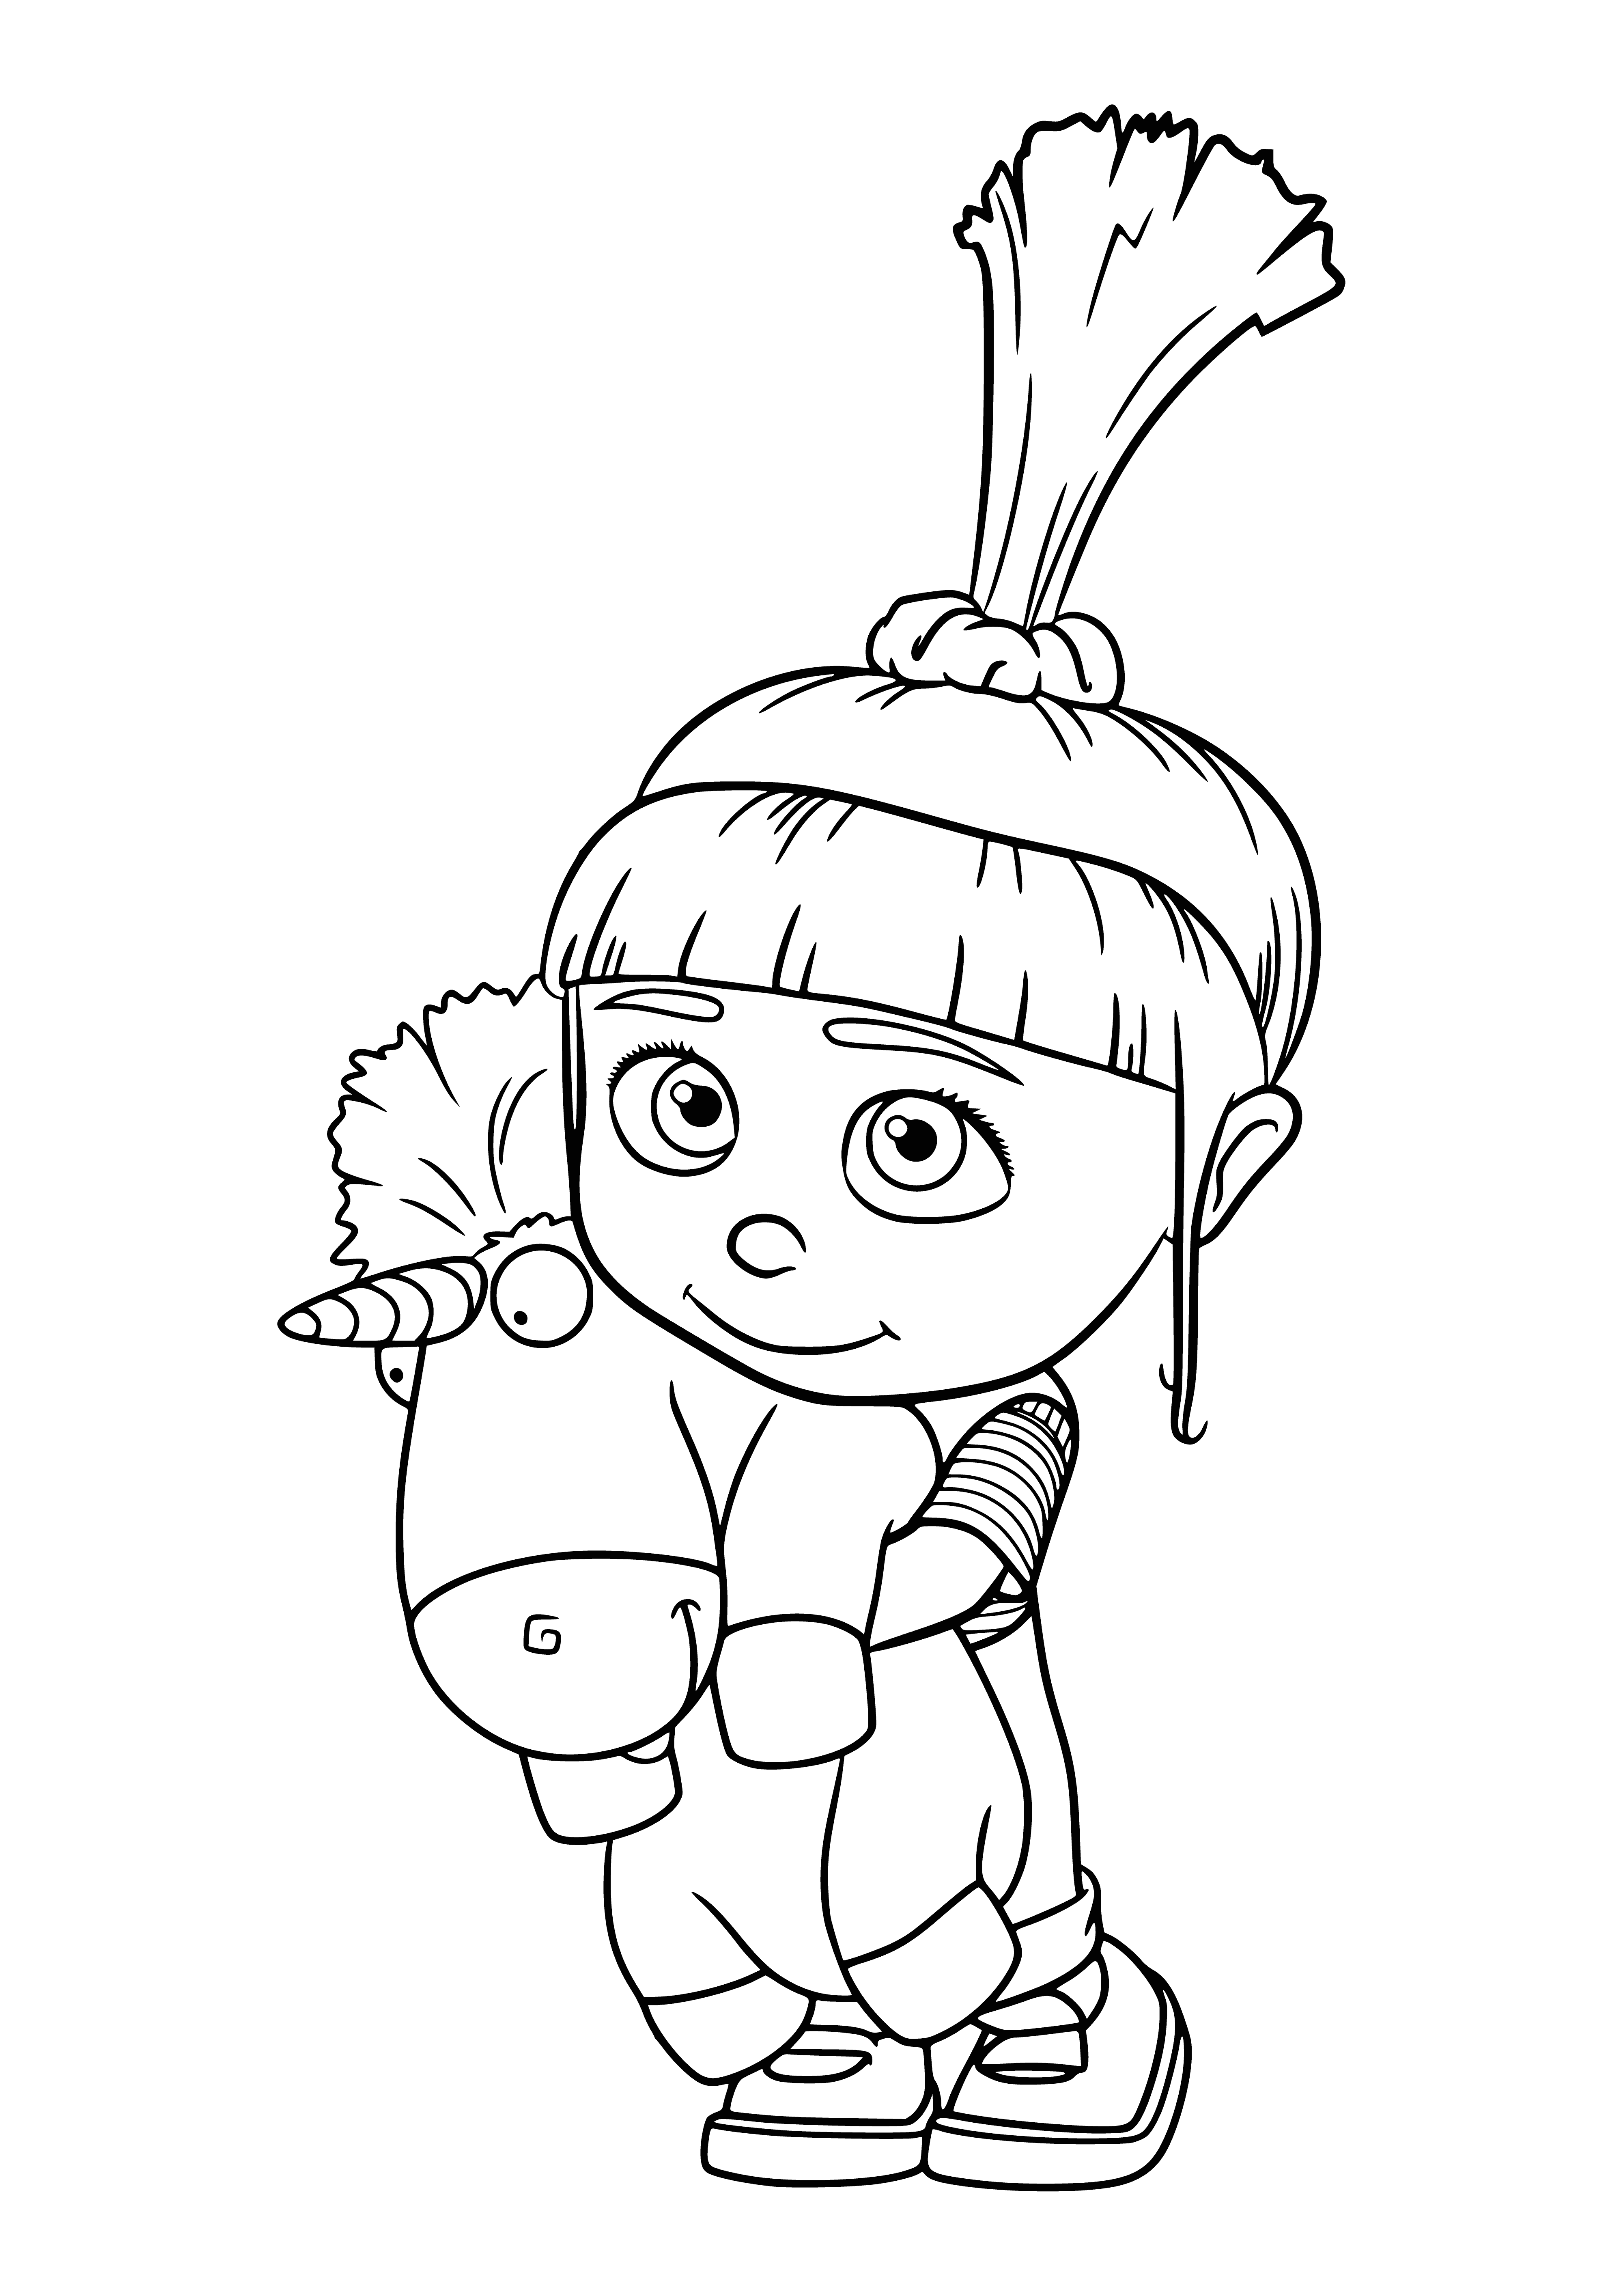 coloring page: Agnes from Despicable Me holds white unicorn with pink mane, tail, & gold horn in coloring page.